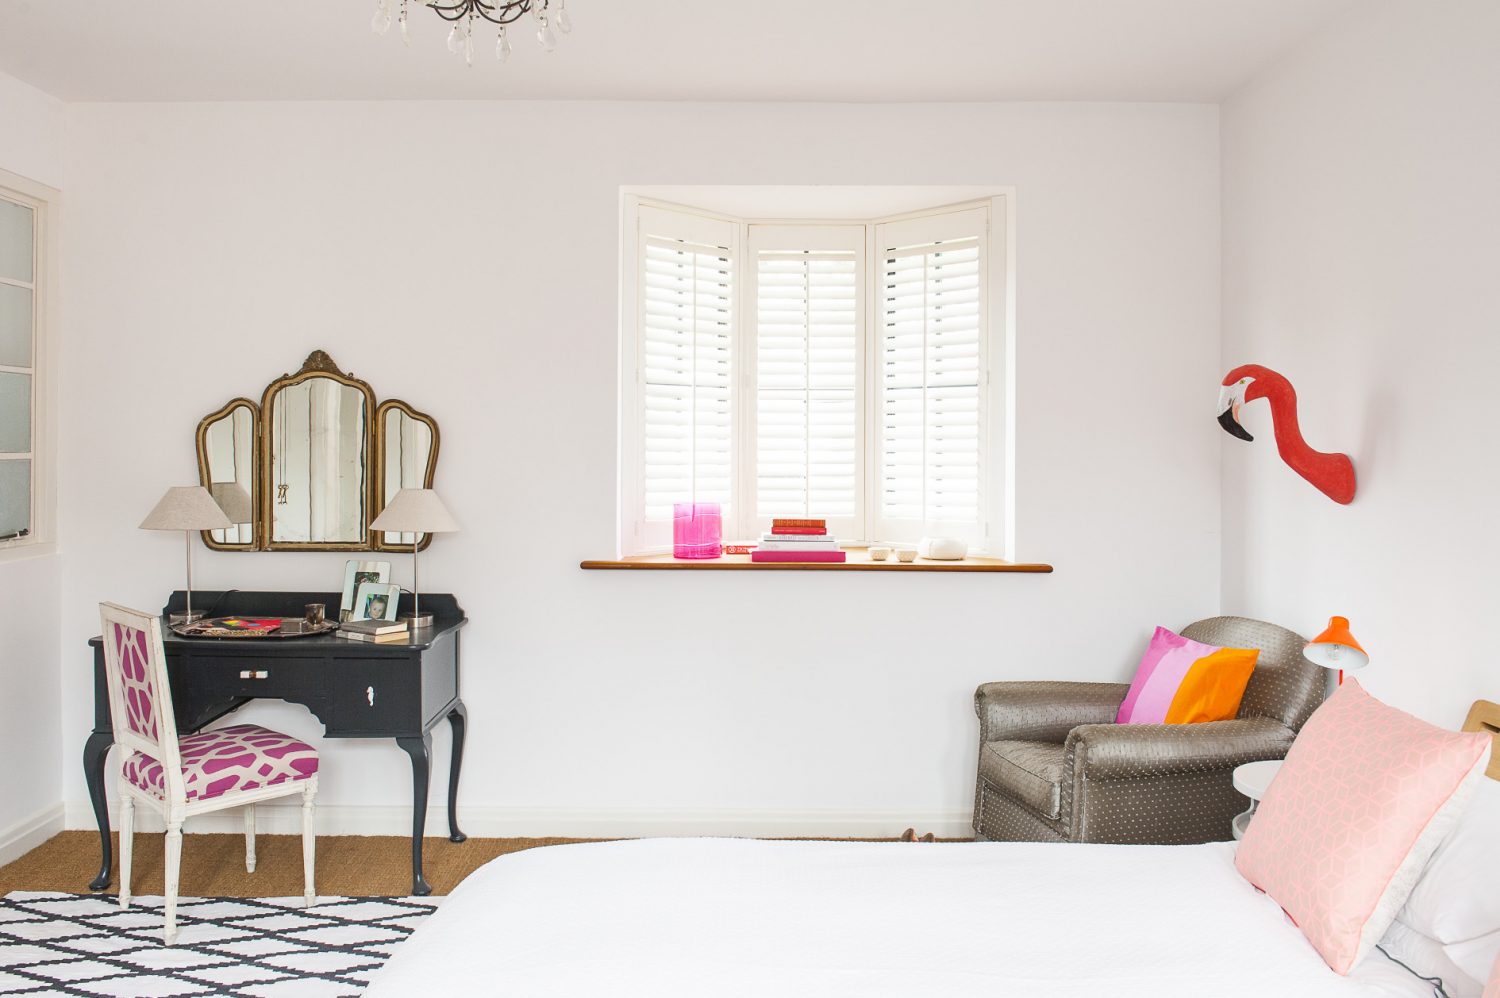 Bright dashes of colour and touches of humour, such as the flamingo’s head protruding from the wall, prevent the rooms feeling at all austere – despite the liberal use of white paint on the walls